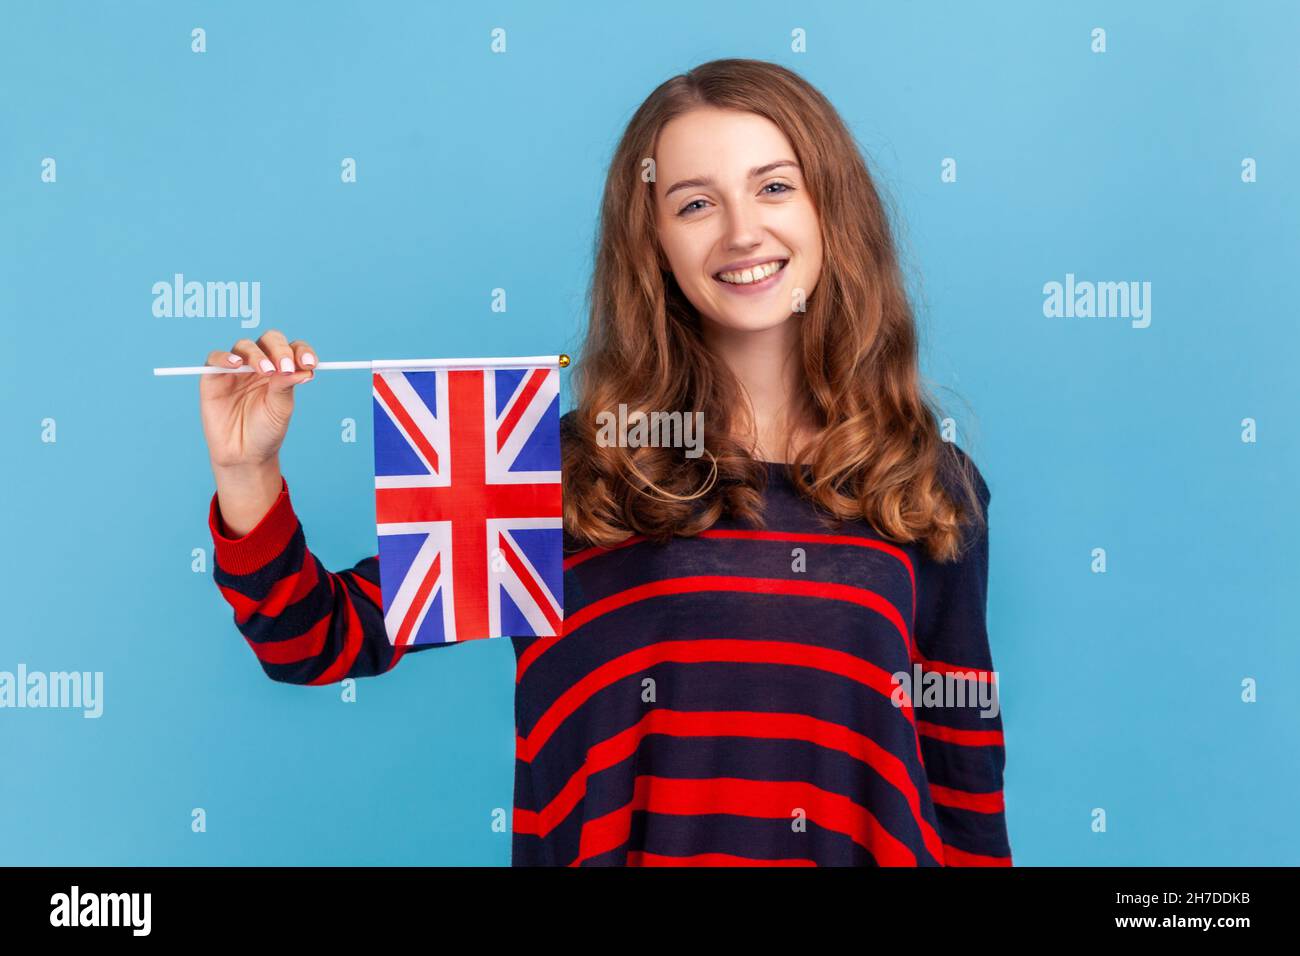 Attractive woman wearing striped casual style sweater, holding flag of a constituent unit of the United Kingdom, celebrating British Independence Day Indoor studio shot isolated on blue background. Stock Photo